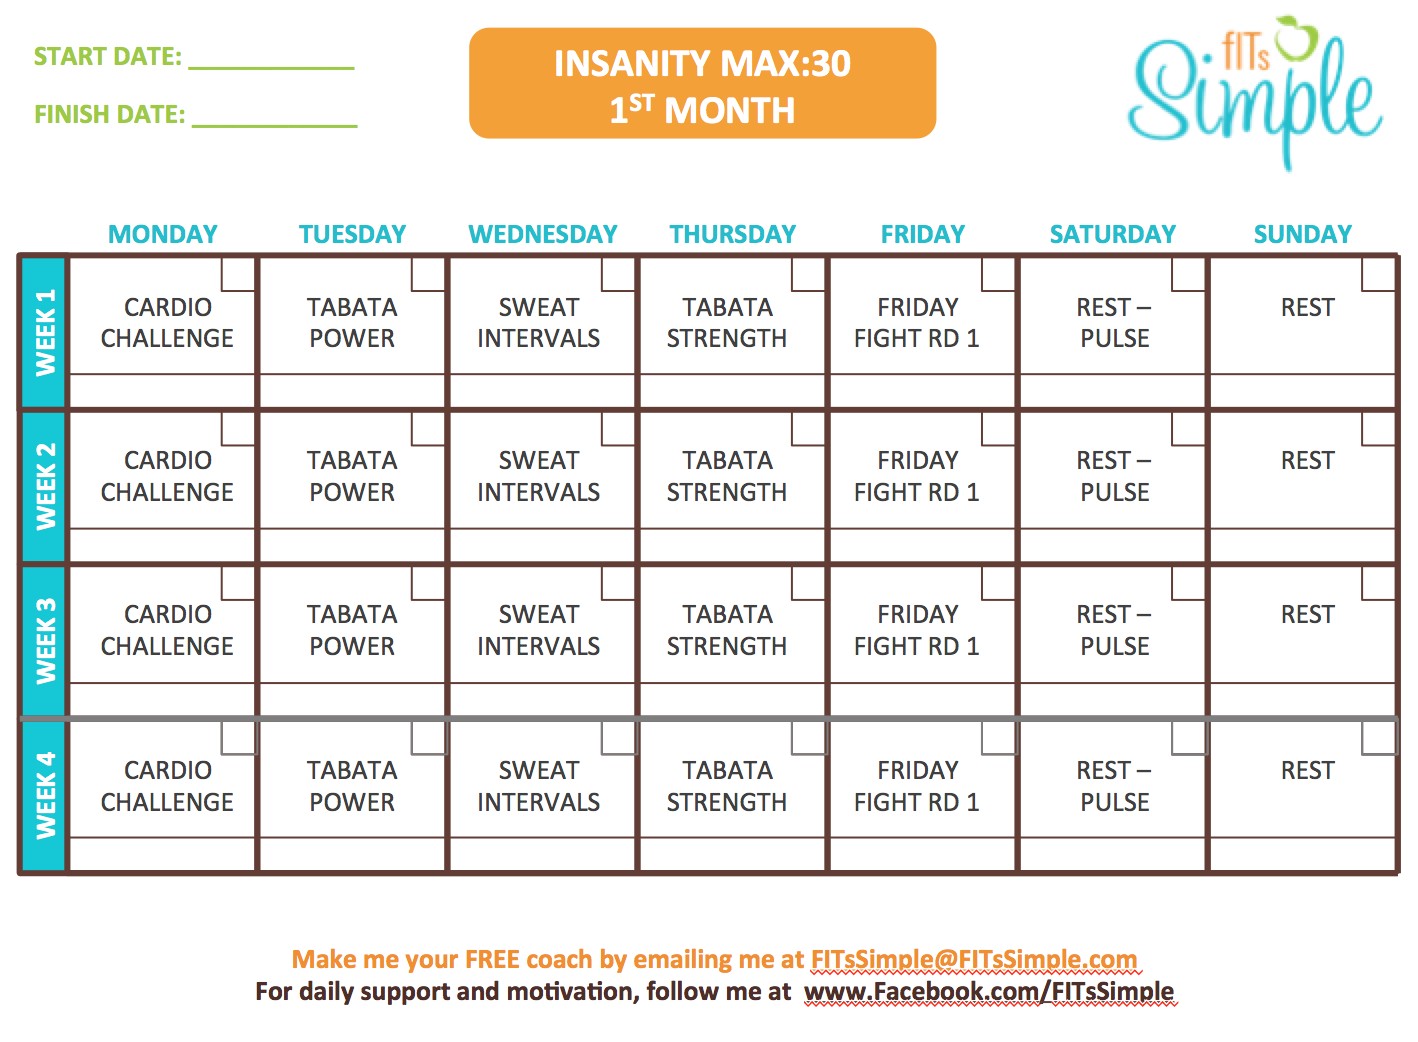 Insanity Max 30 Workout Calendar FREE DOWNLOAD